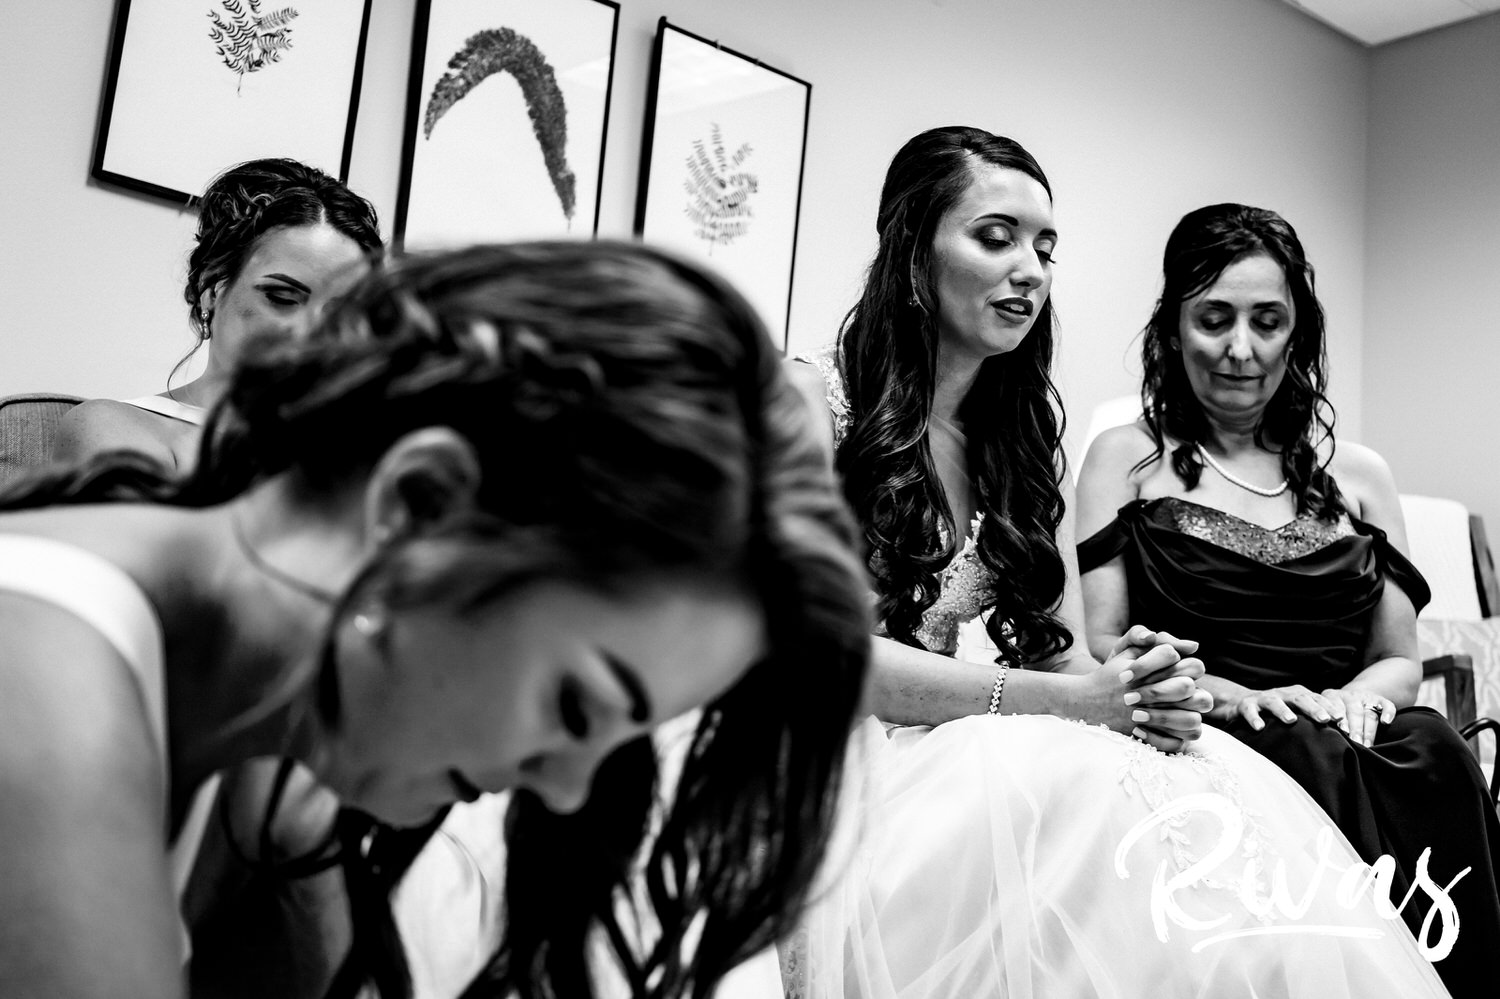 A candid black and white picture taken just before a wedding ceremony of a bride, praying with her bridesmaids and mom.